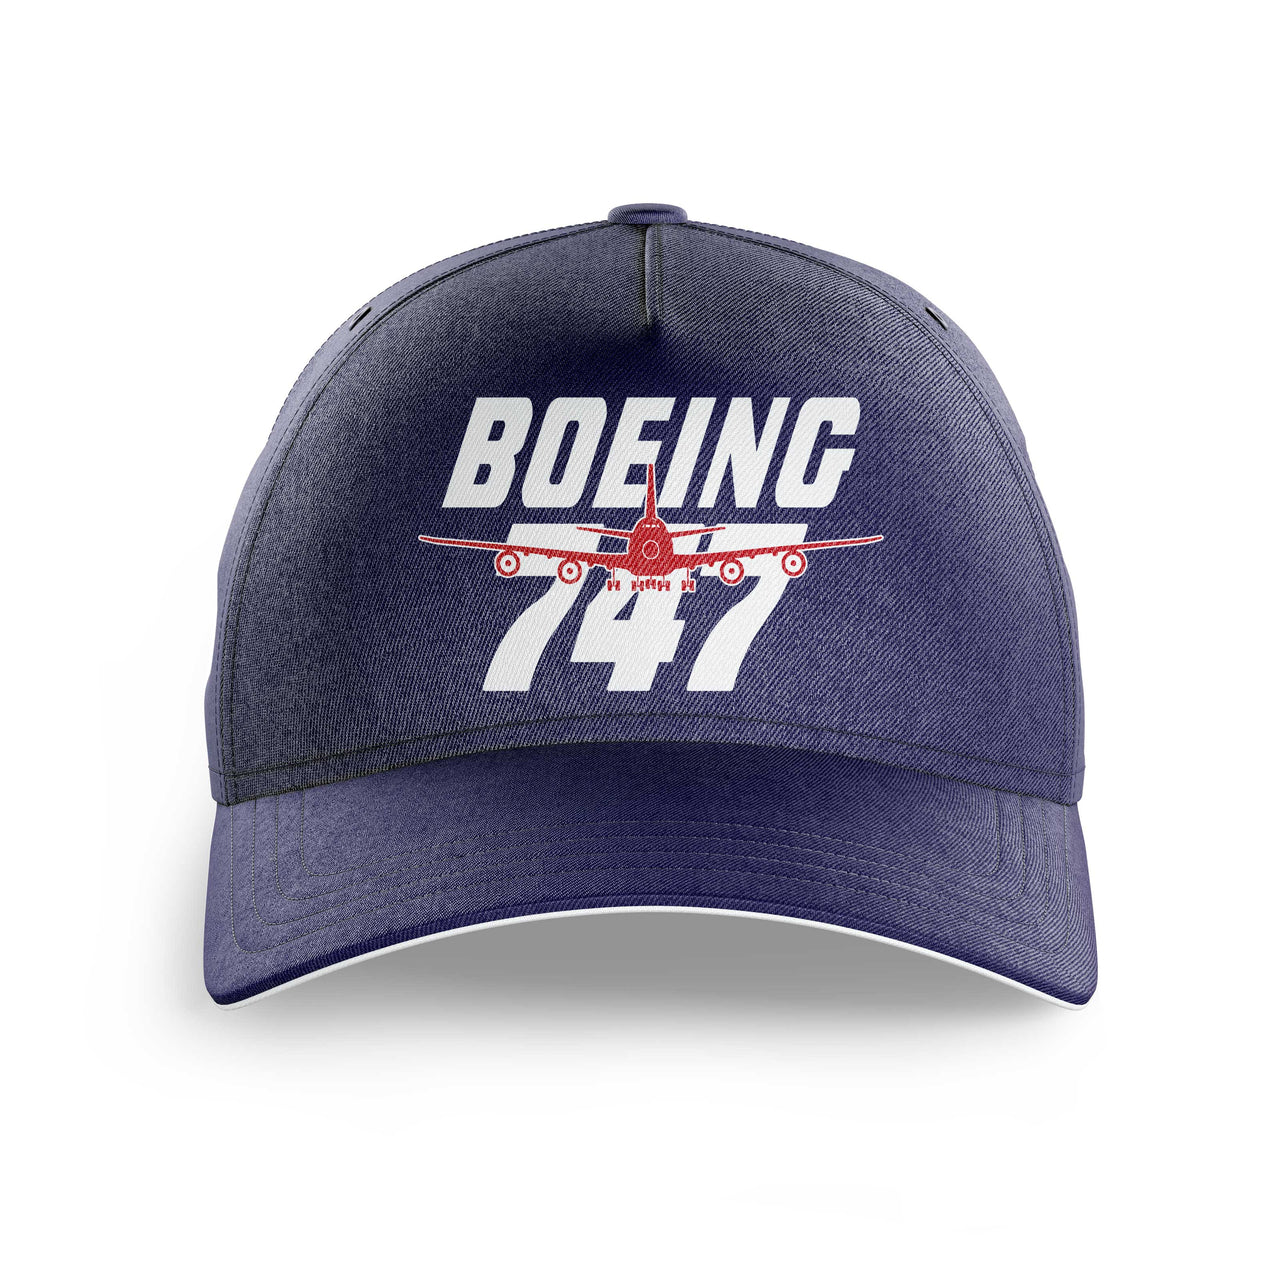 Amazing Boeing 747 Max Printed Hats